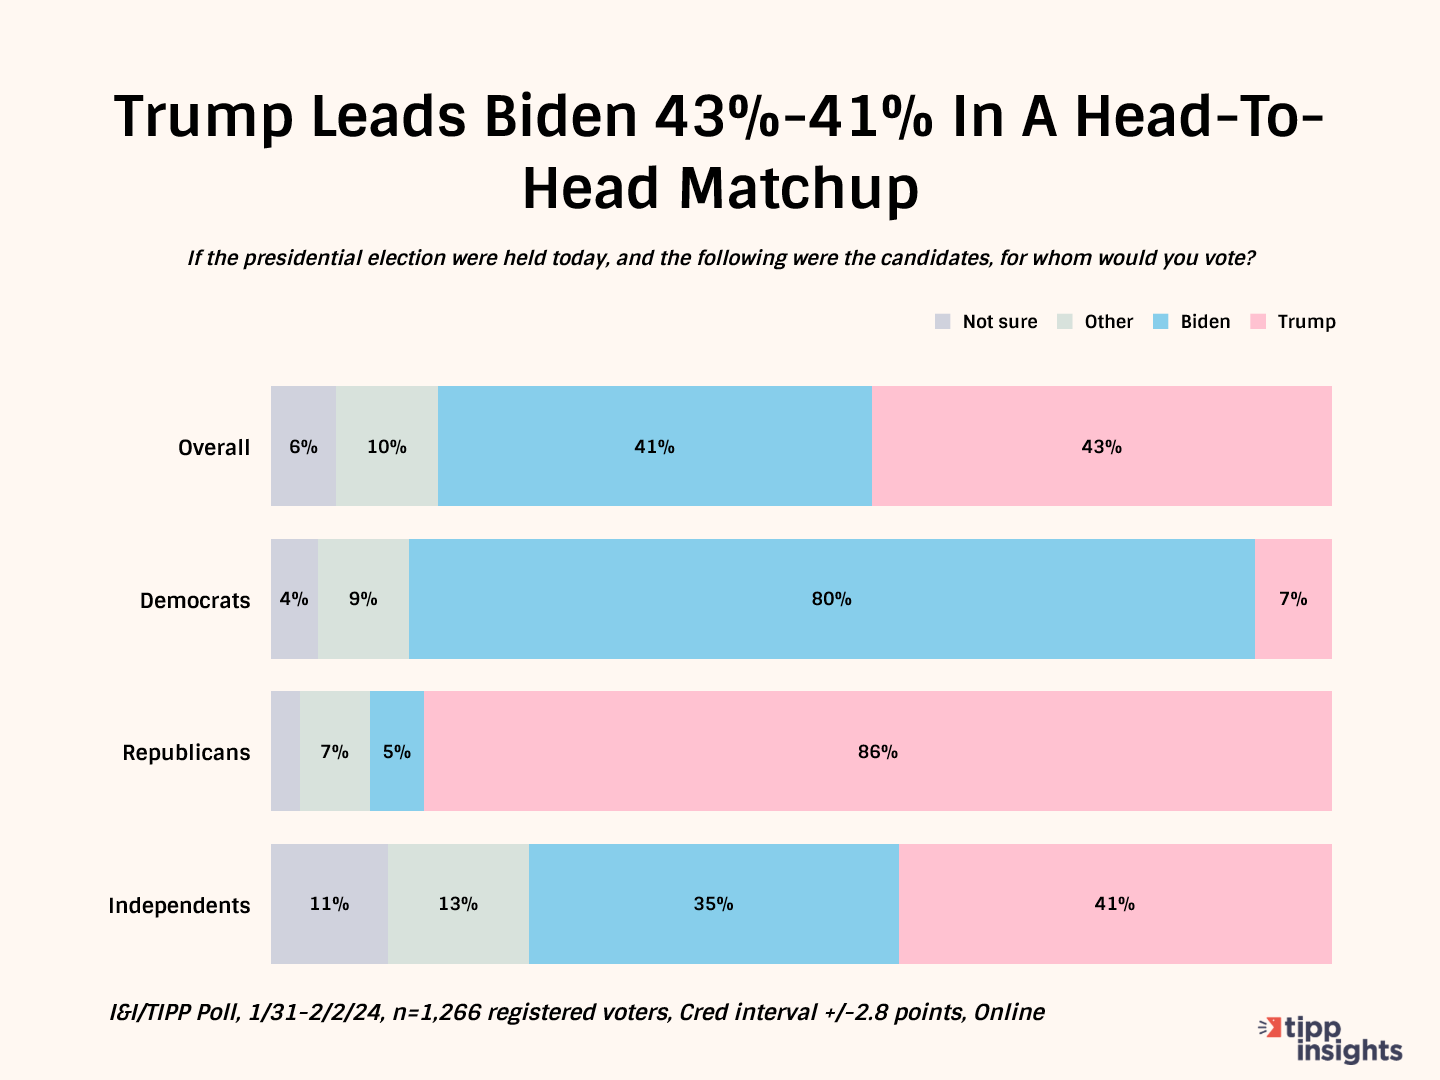 Frustrated Independents Give Trump An Edge Over Biden In 2024: I&I/TIPP Poll